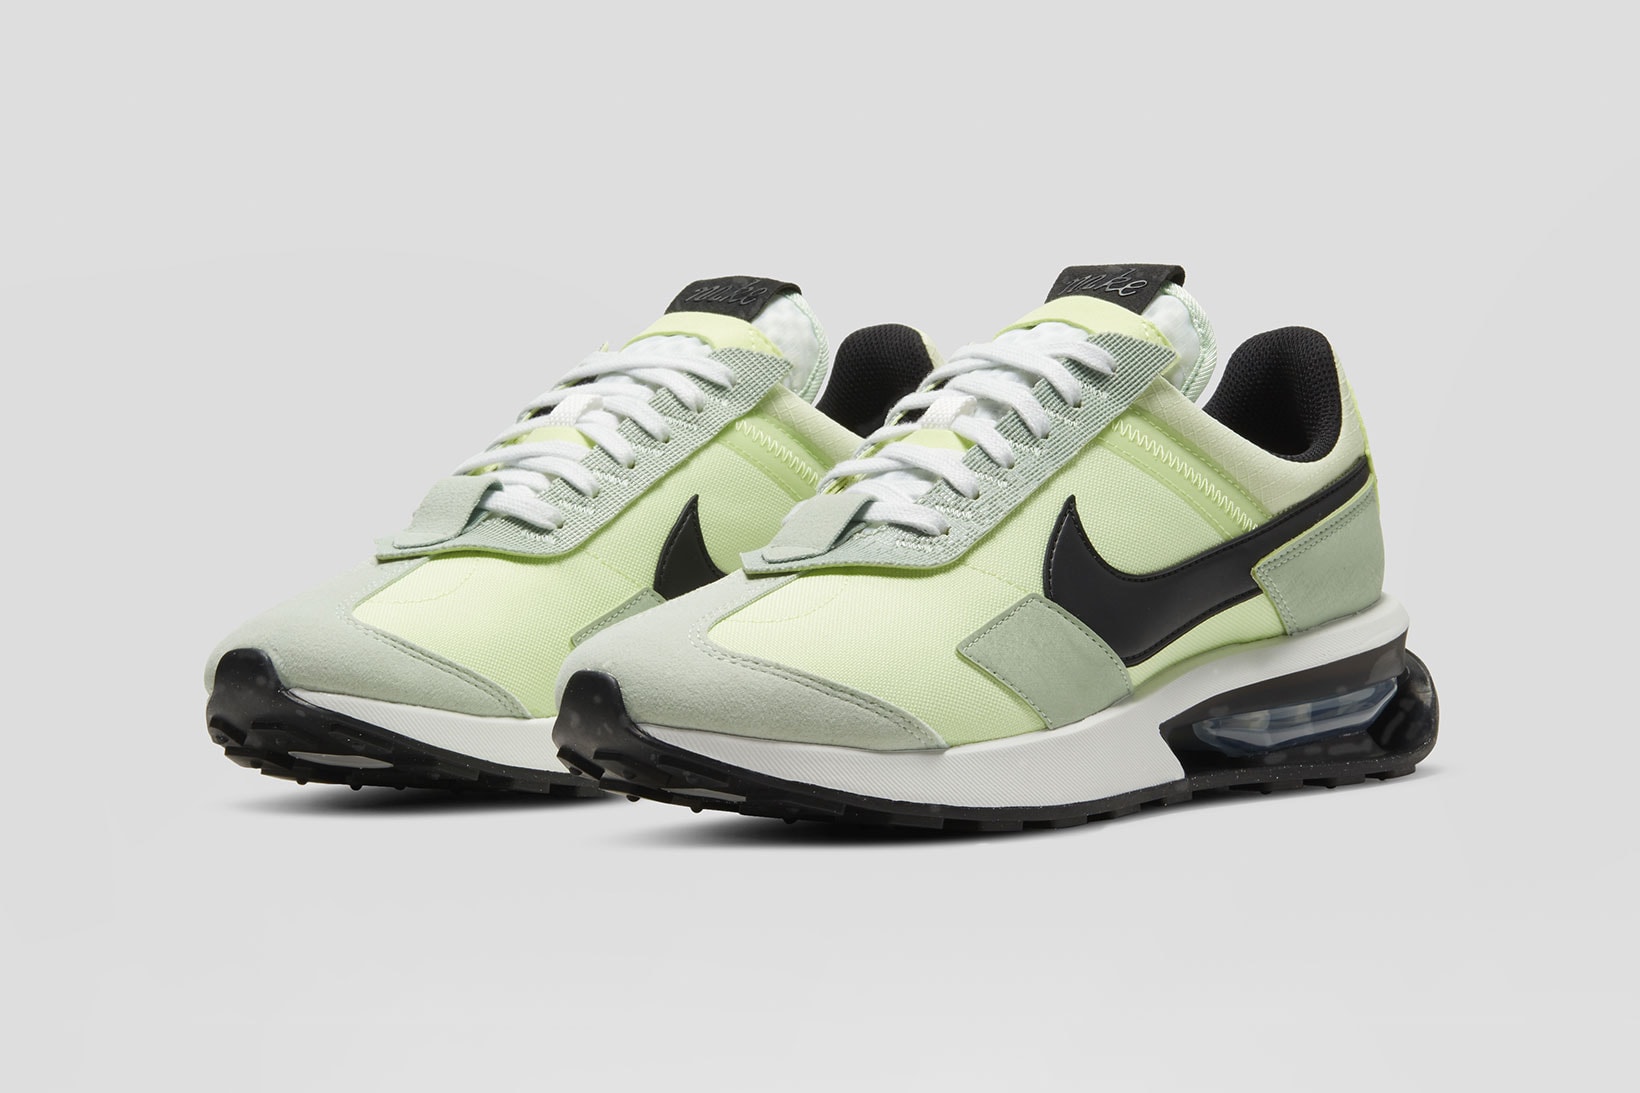 nike air max pre-day volt green black white front toe laterals details close up